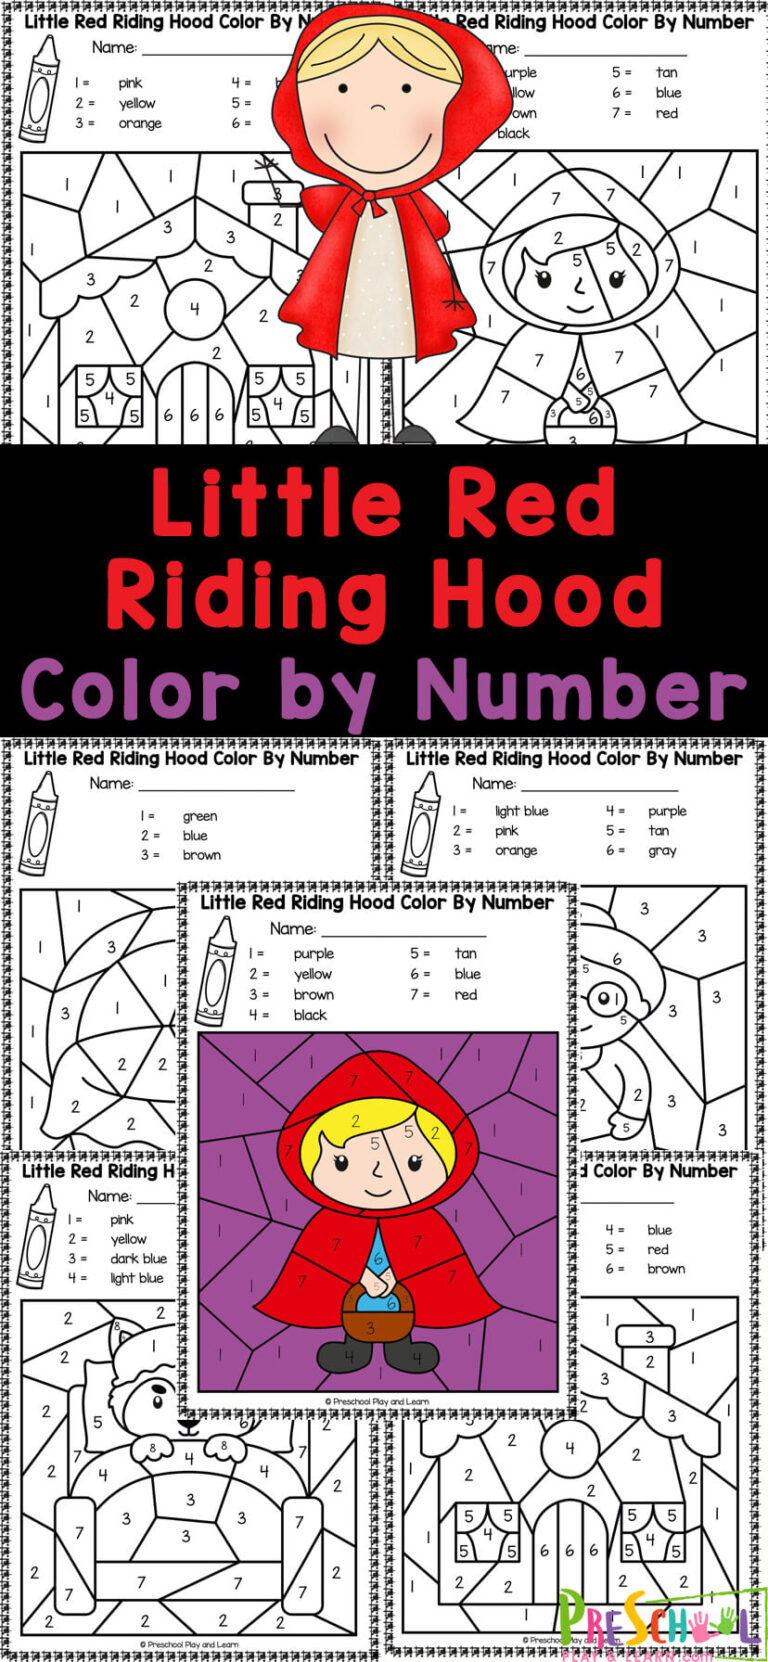 free-printable-little-red-riding-hood-color-by-number-worksheets